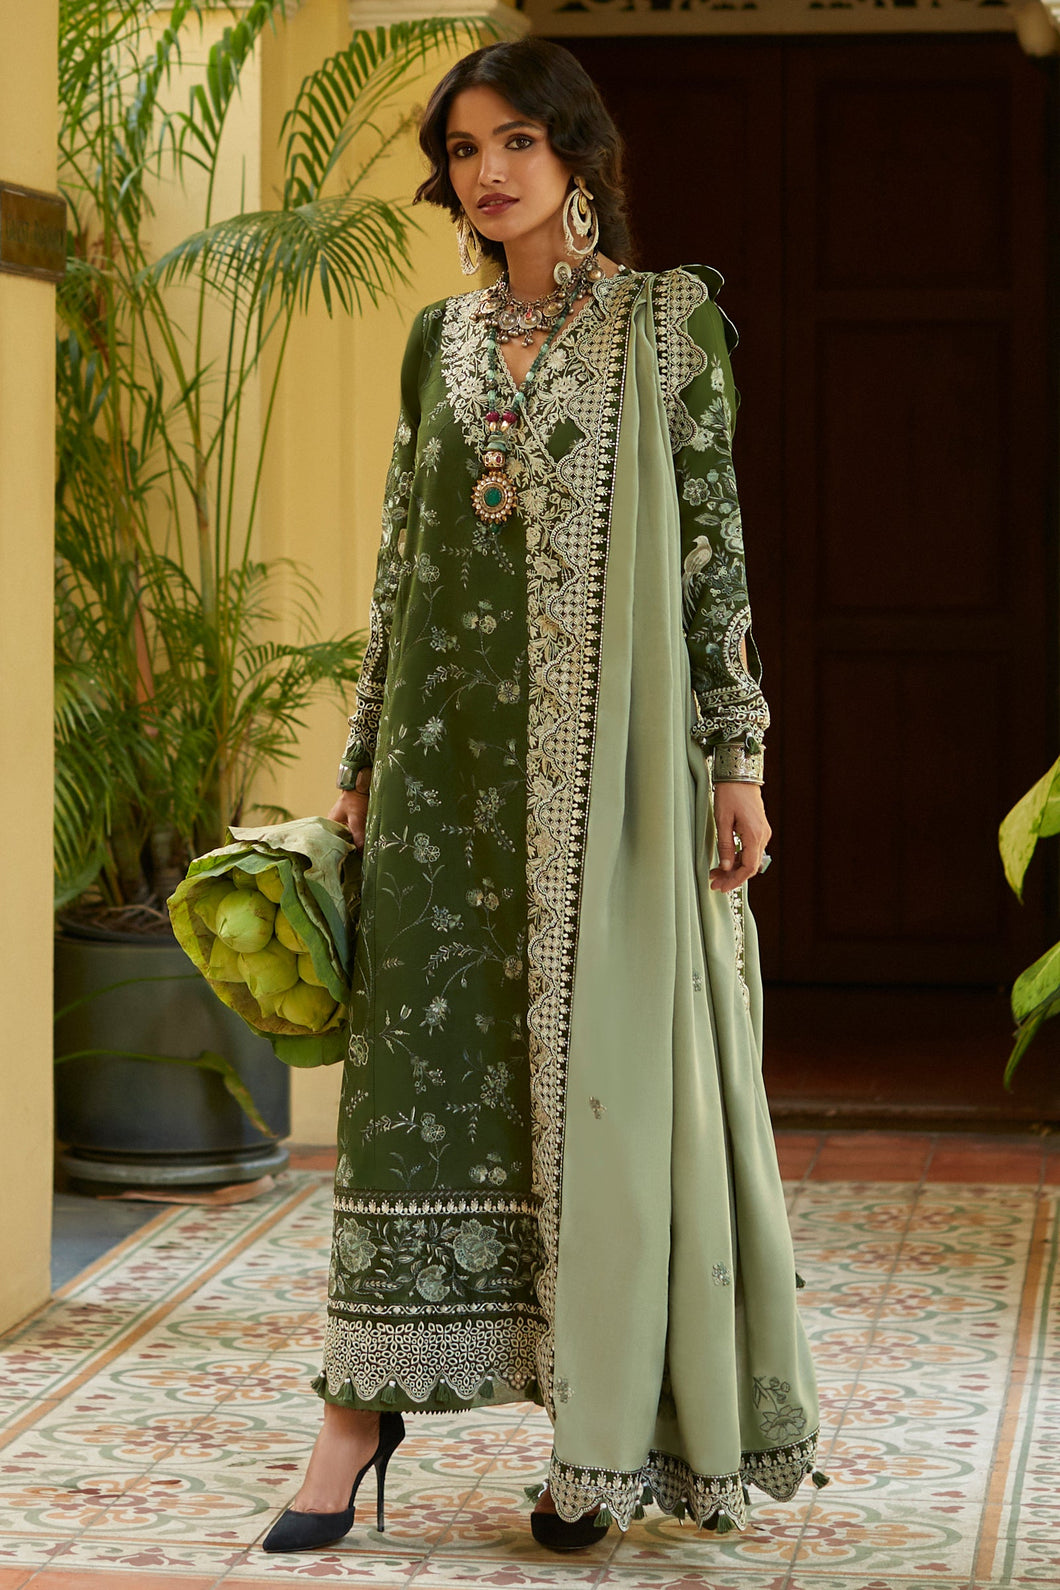 Buy Zaha Winter Collection 2022 by KHADIJAH SHAH Online at Great Price! Next Day Delivery UK. ZAHA Modern Printed embroidery dresses on lawn & luxury cotton designer printed fabric created by Khadija Shah from Pakistan on  SALE in the UK, USA, Malaysia, London. Book now ready to wear Zaha Online Dresses at Lebaas.